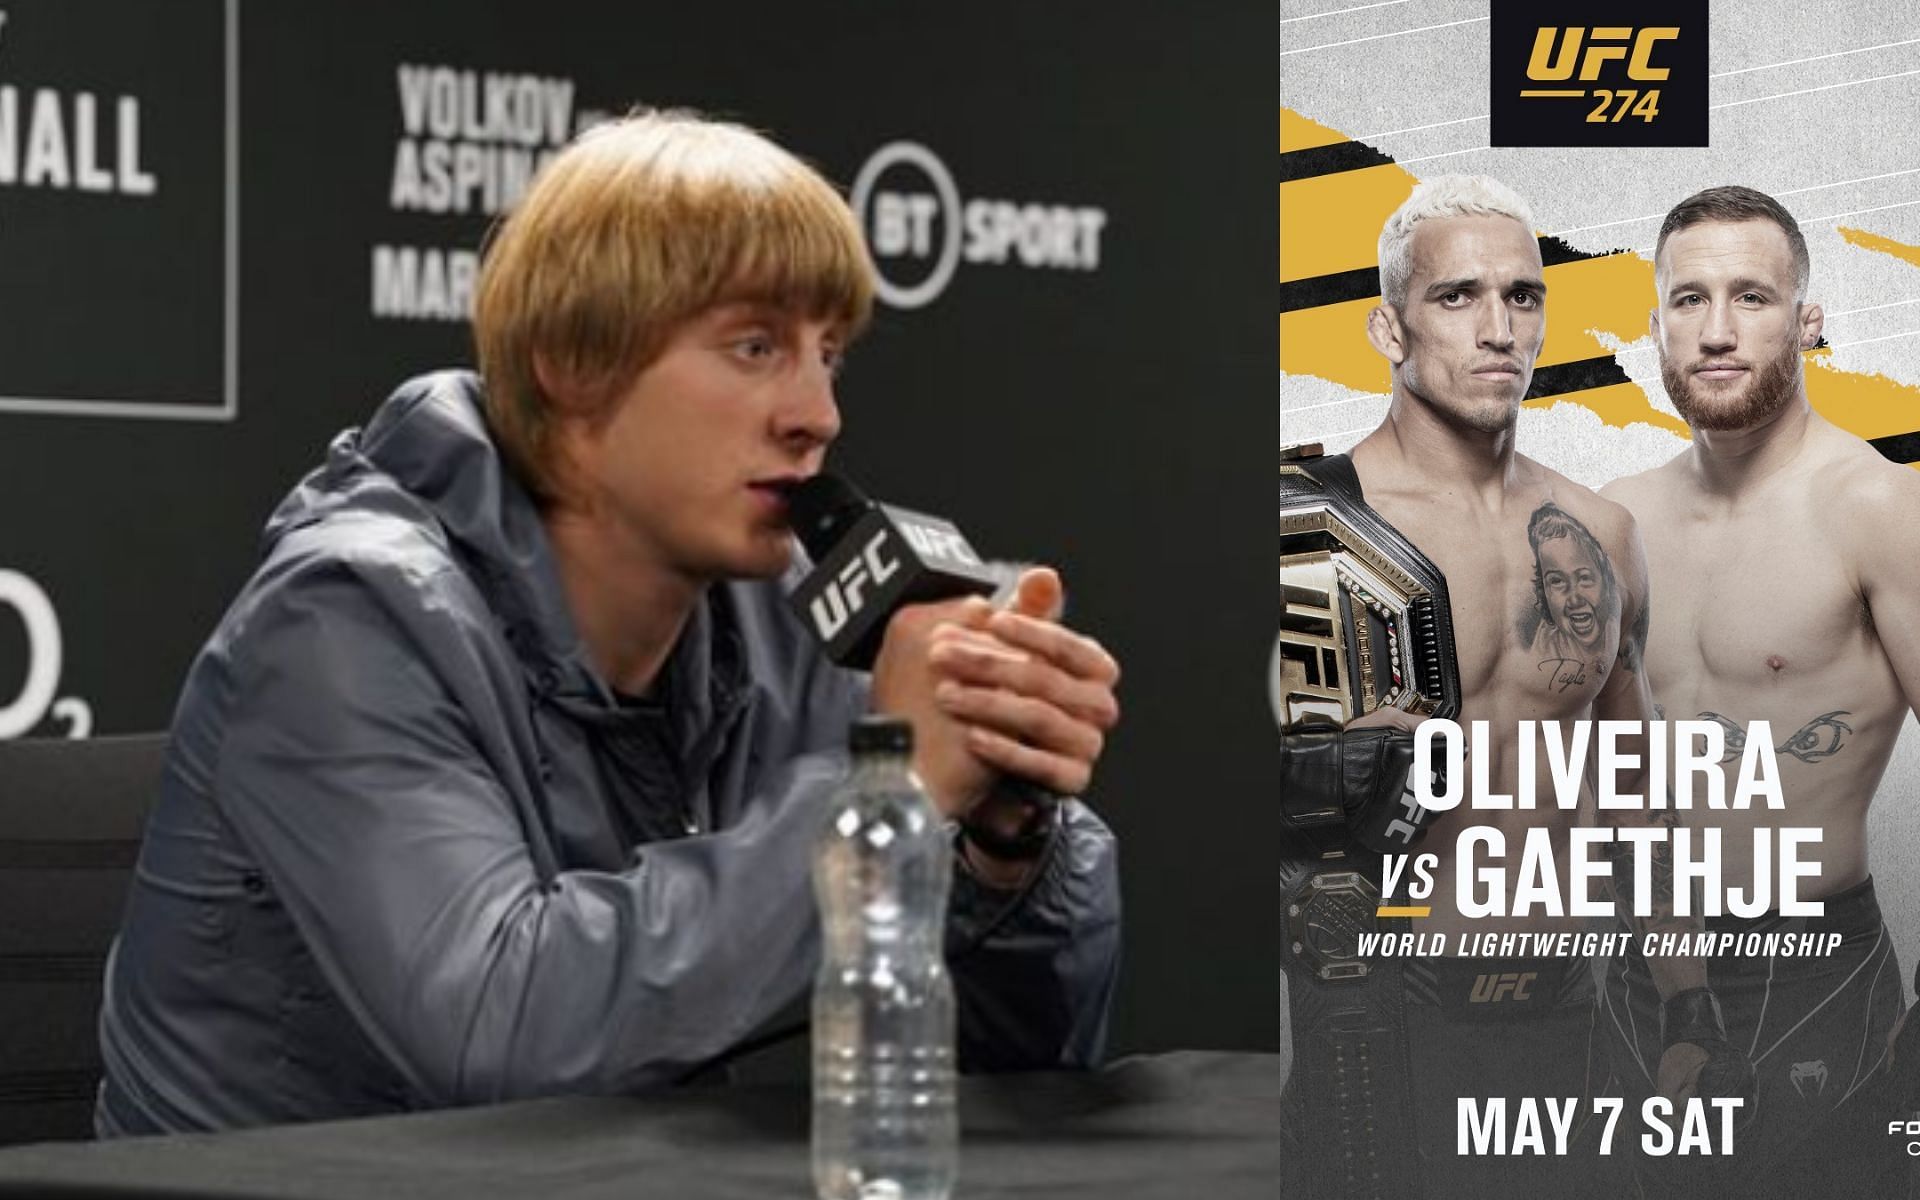 Paddy Pimblett (left. Image credit: @theufcbaddy on Instagram), Charles Oliveira and Justin Gaethje (right. Image credit: UFC on Facebook)